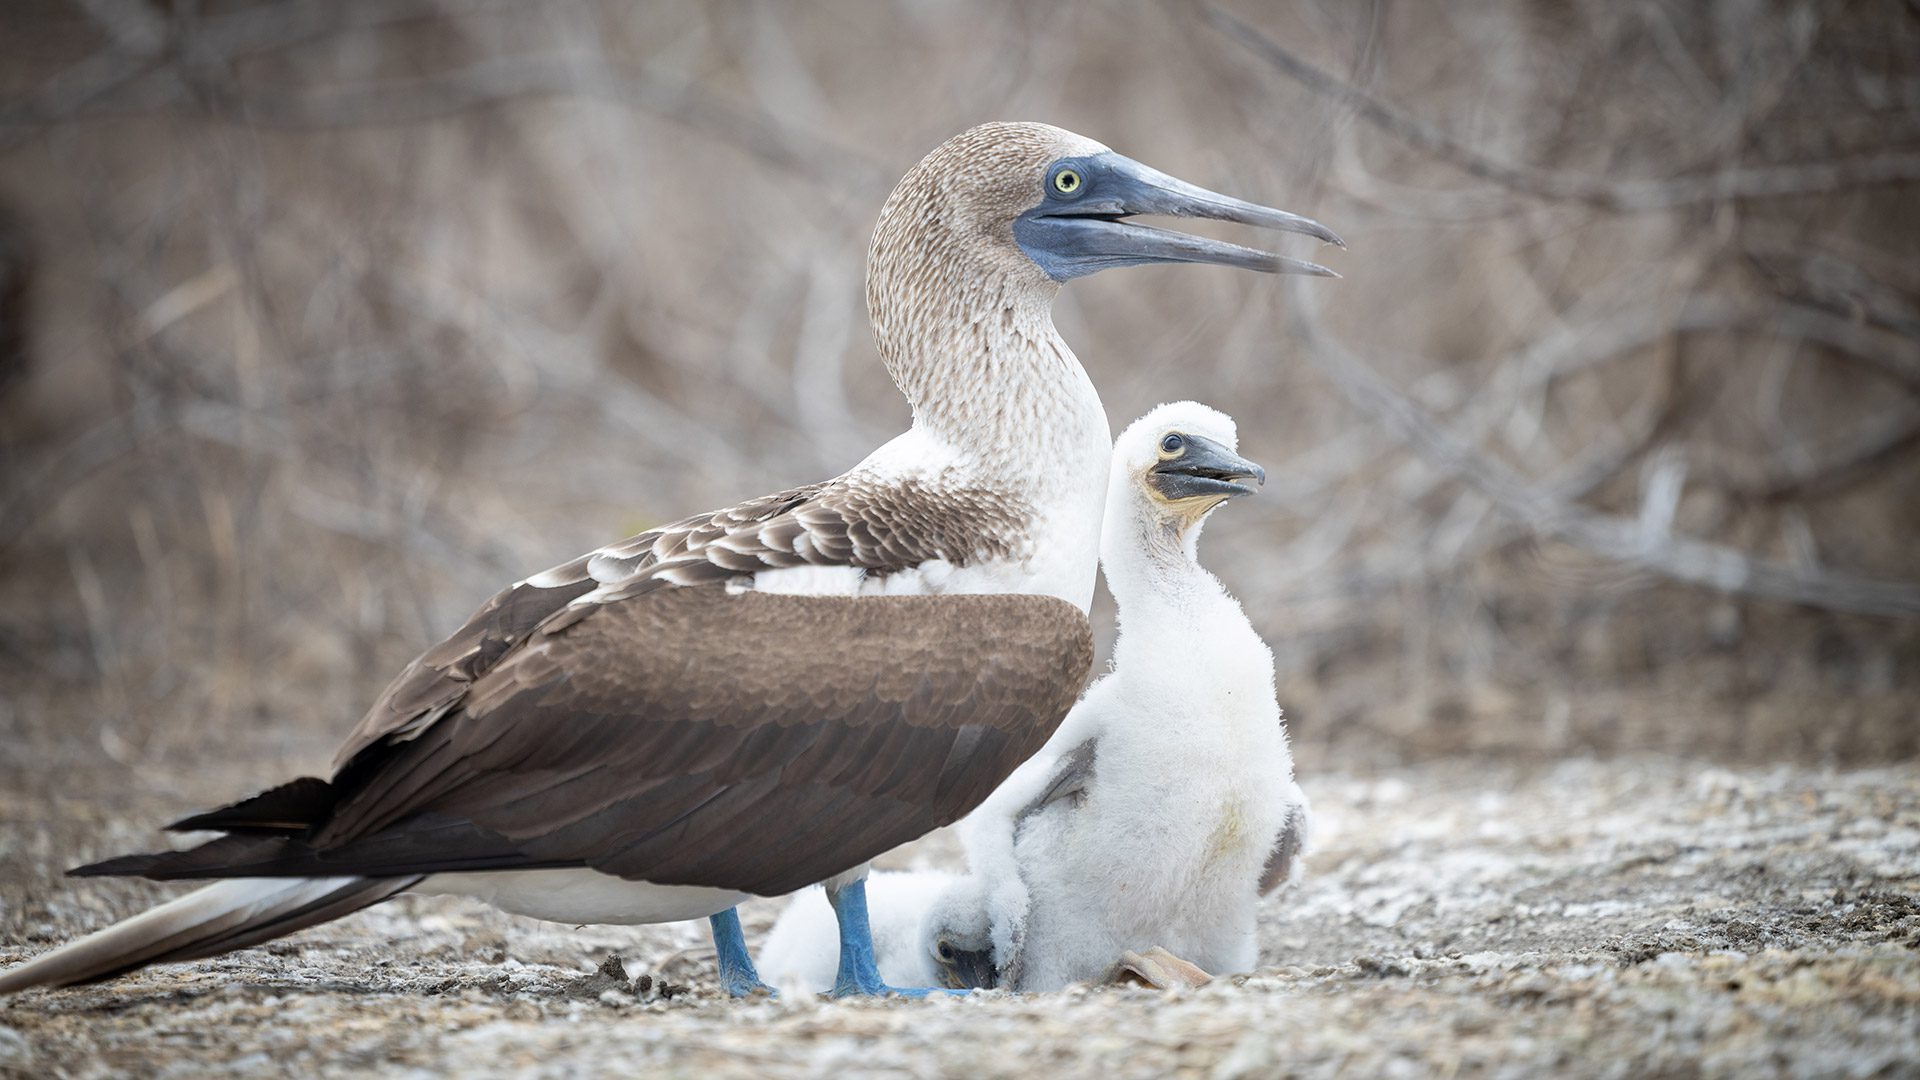 A Blue-footed Booby and chicks in the dry forest of Isla de La Plata, during our whale watching tour from Puerto López, Ecuador. | Impactful Travel